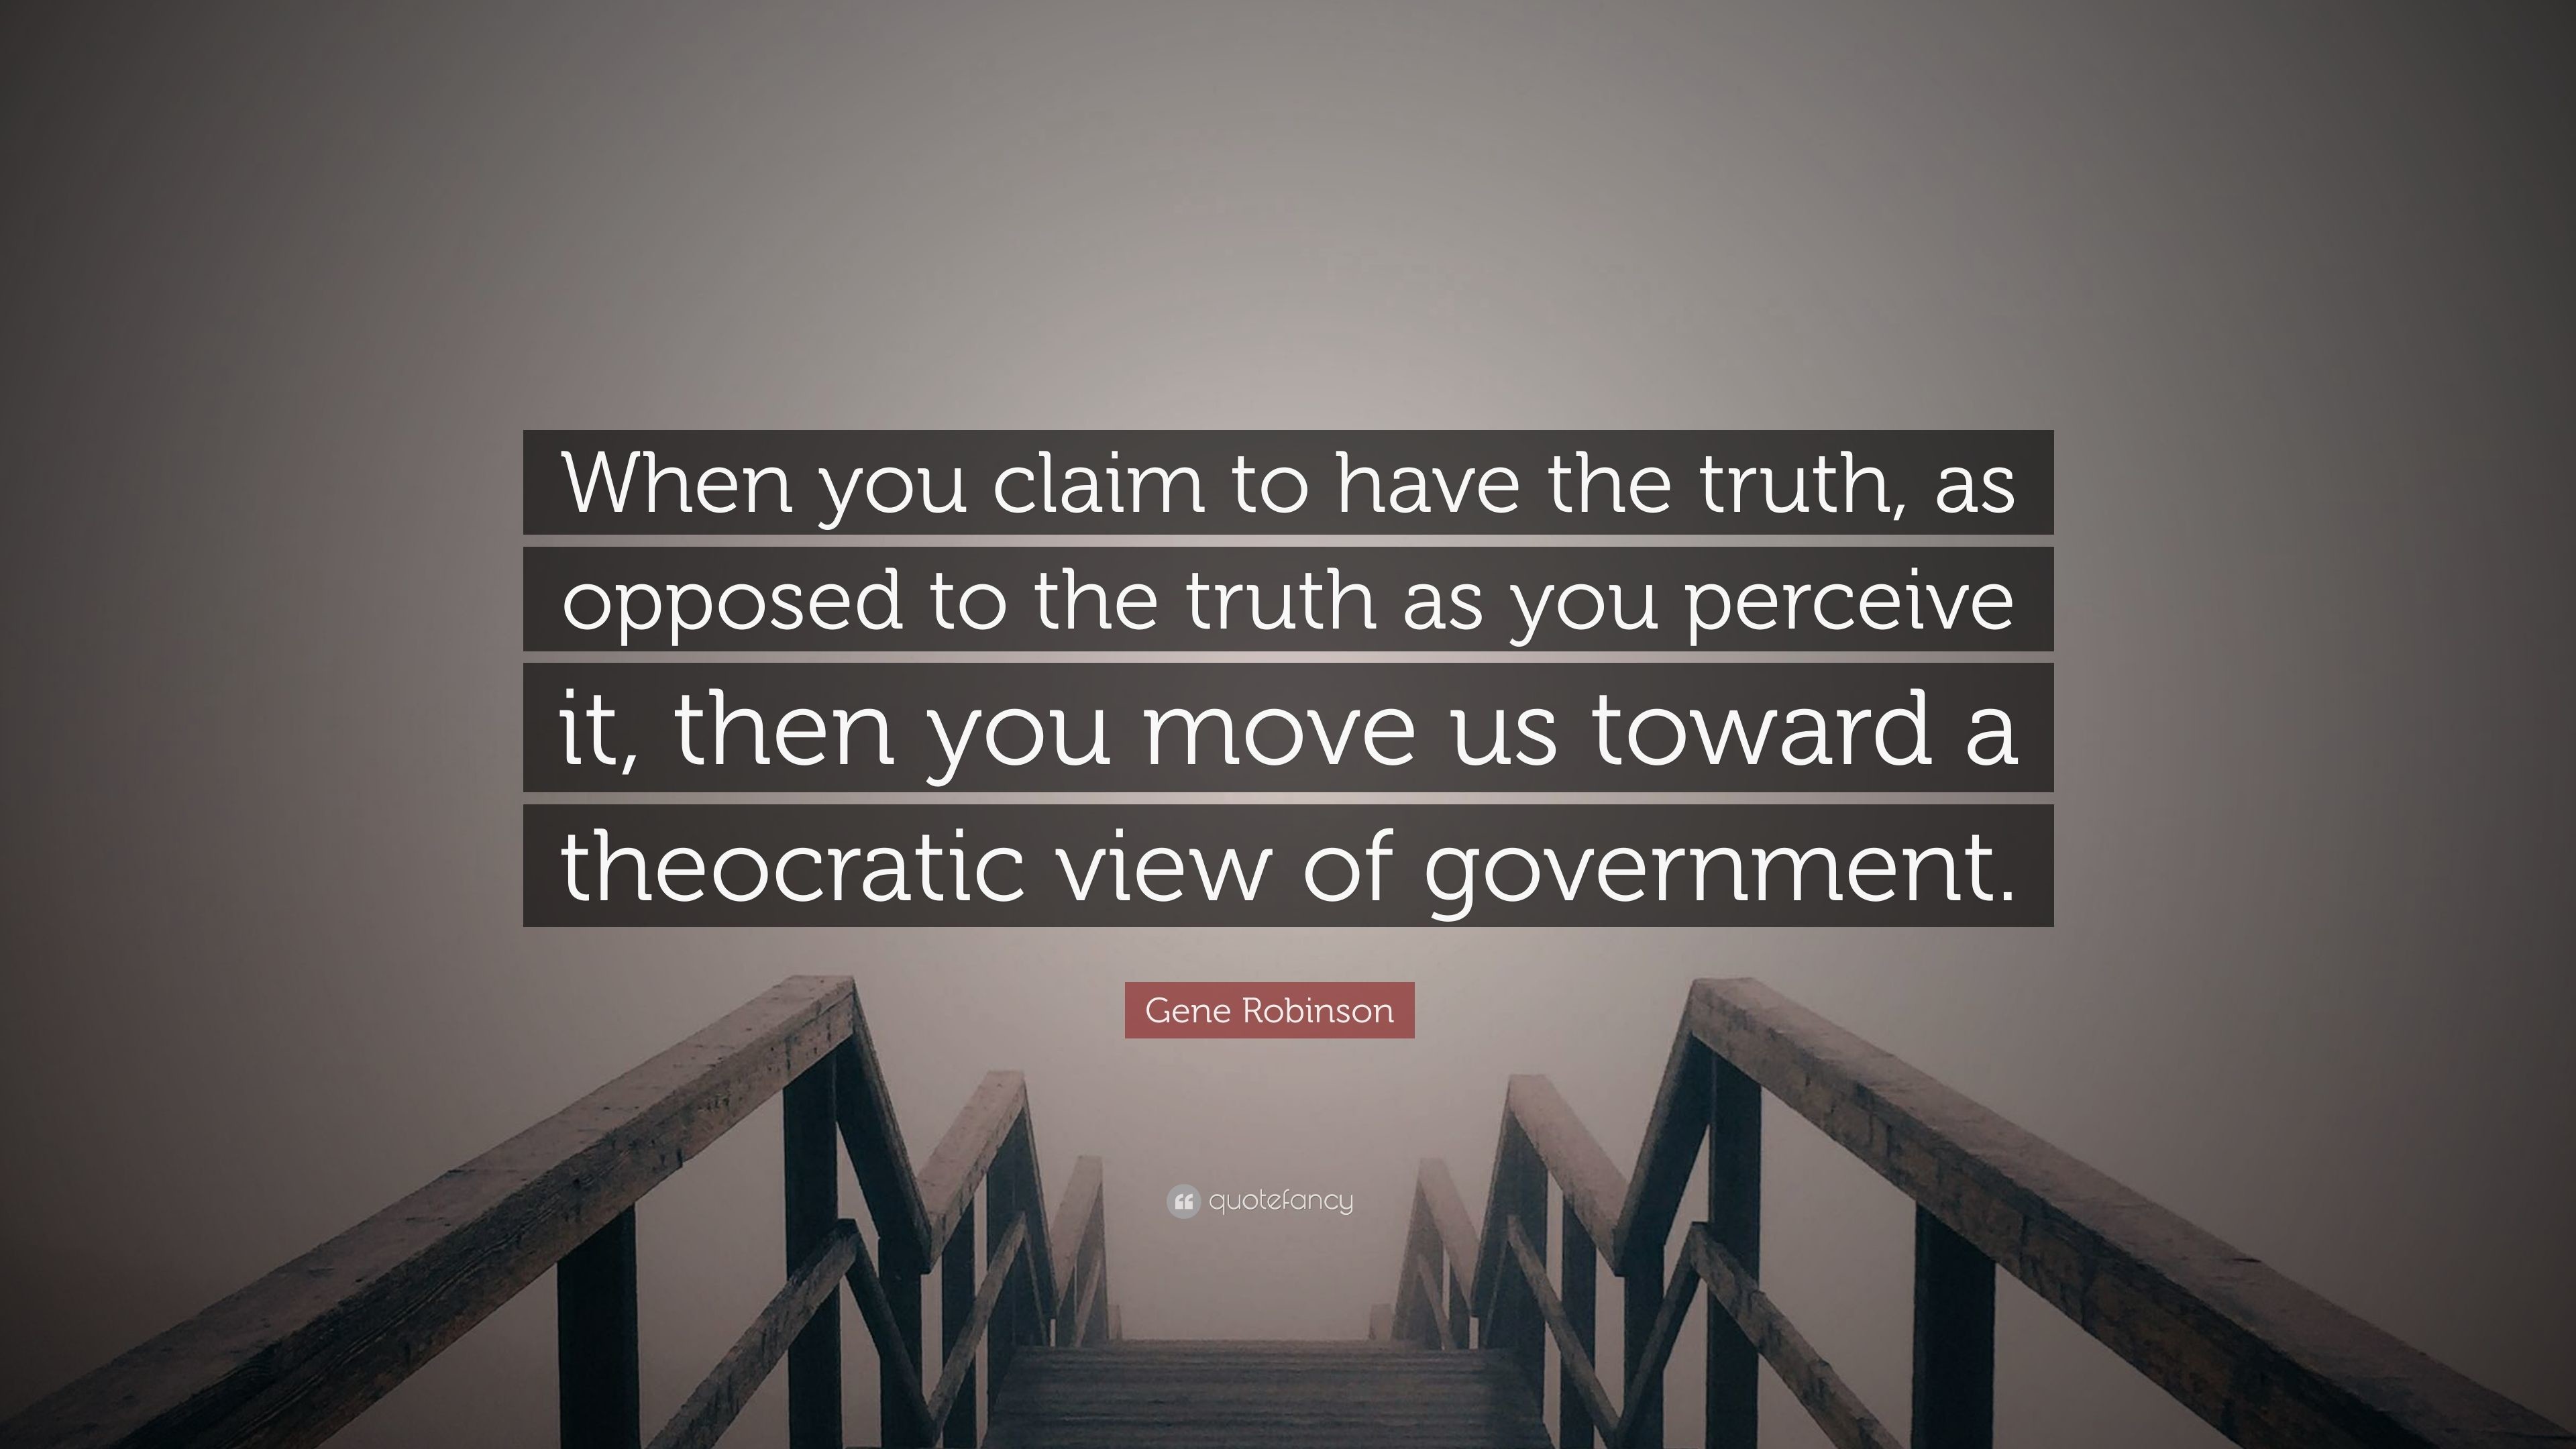 3840x2160 Gene Robinson Quote: “When you claim to have the truth, as opposed to